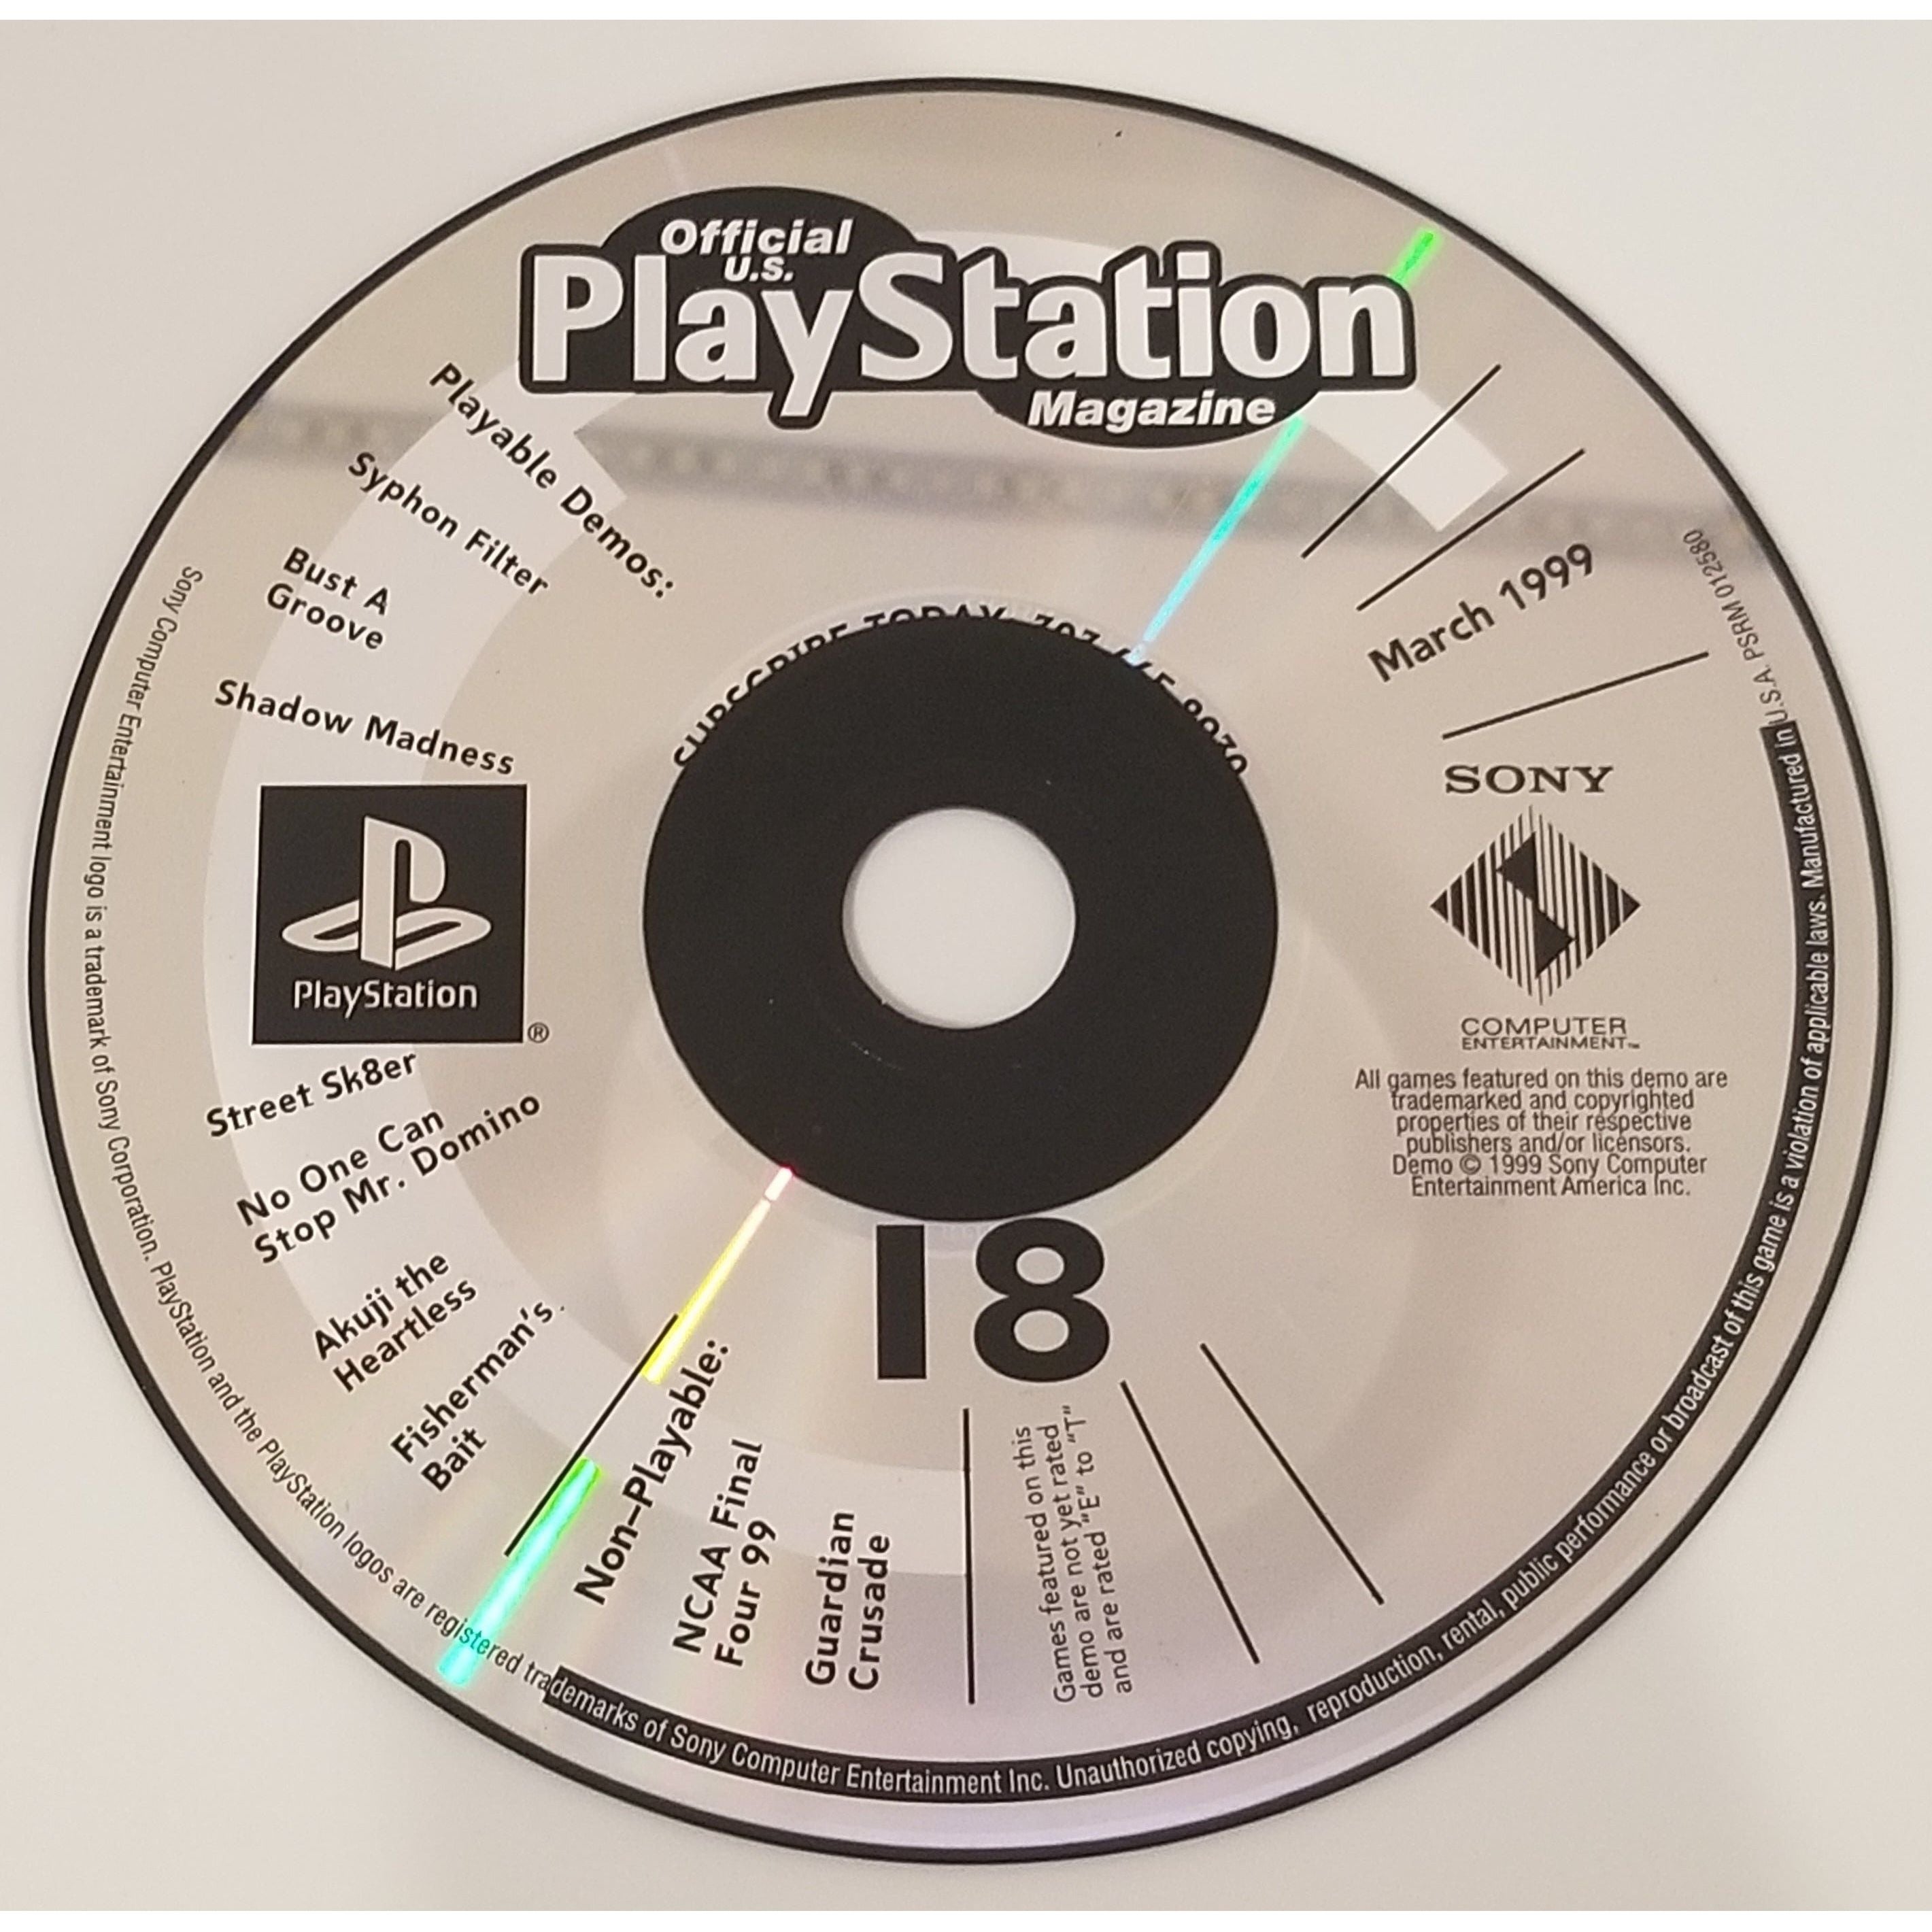 PS1 - Official Playstation Magazine Issue 18 Demo